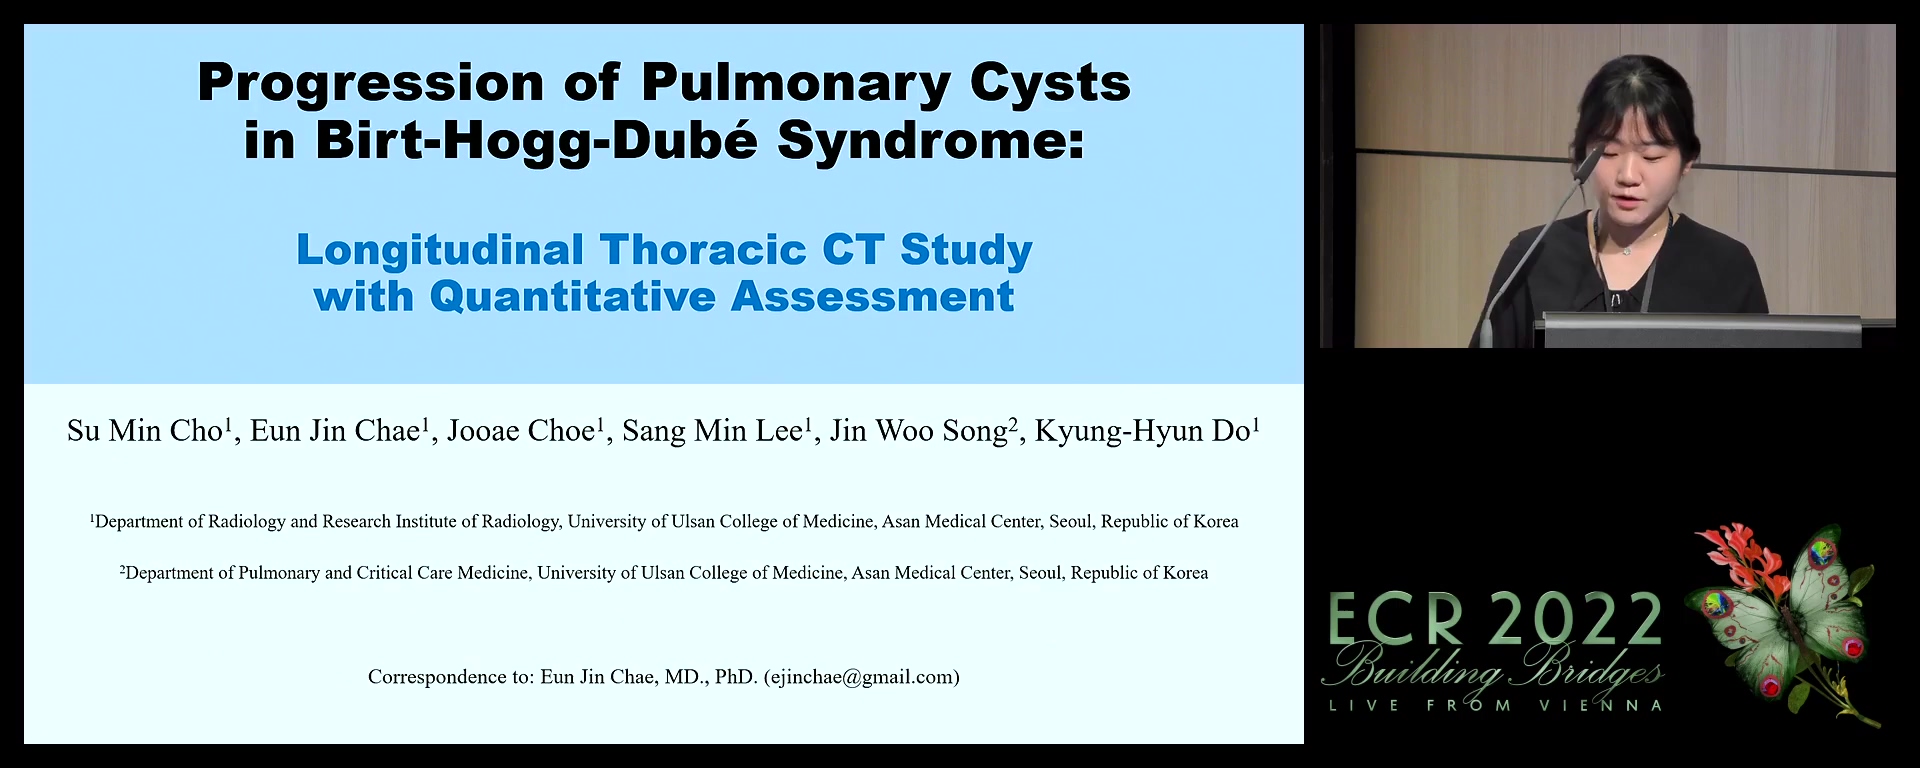 Longitudinal thoracic CT study in Birt-Hogg-Dubé syndrome: progression of cysts and relation with prognosis - Sumin Cho, Seoul / KR